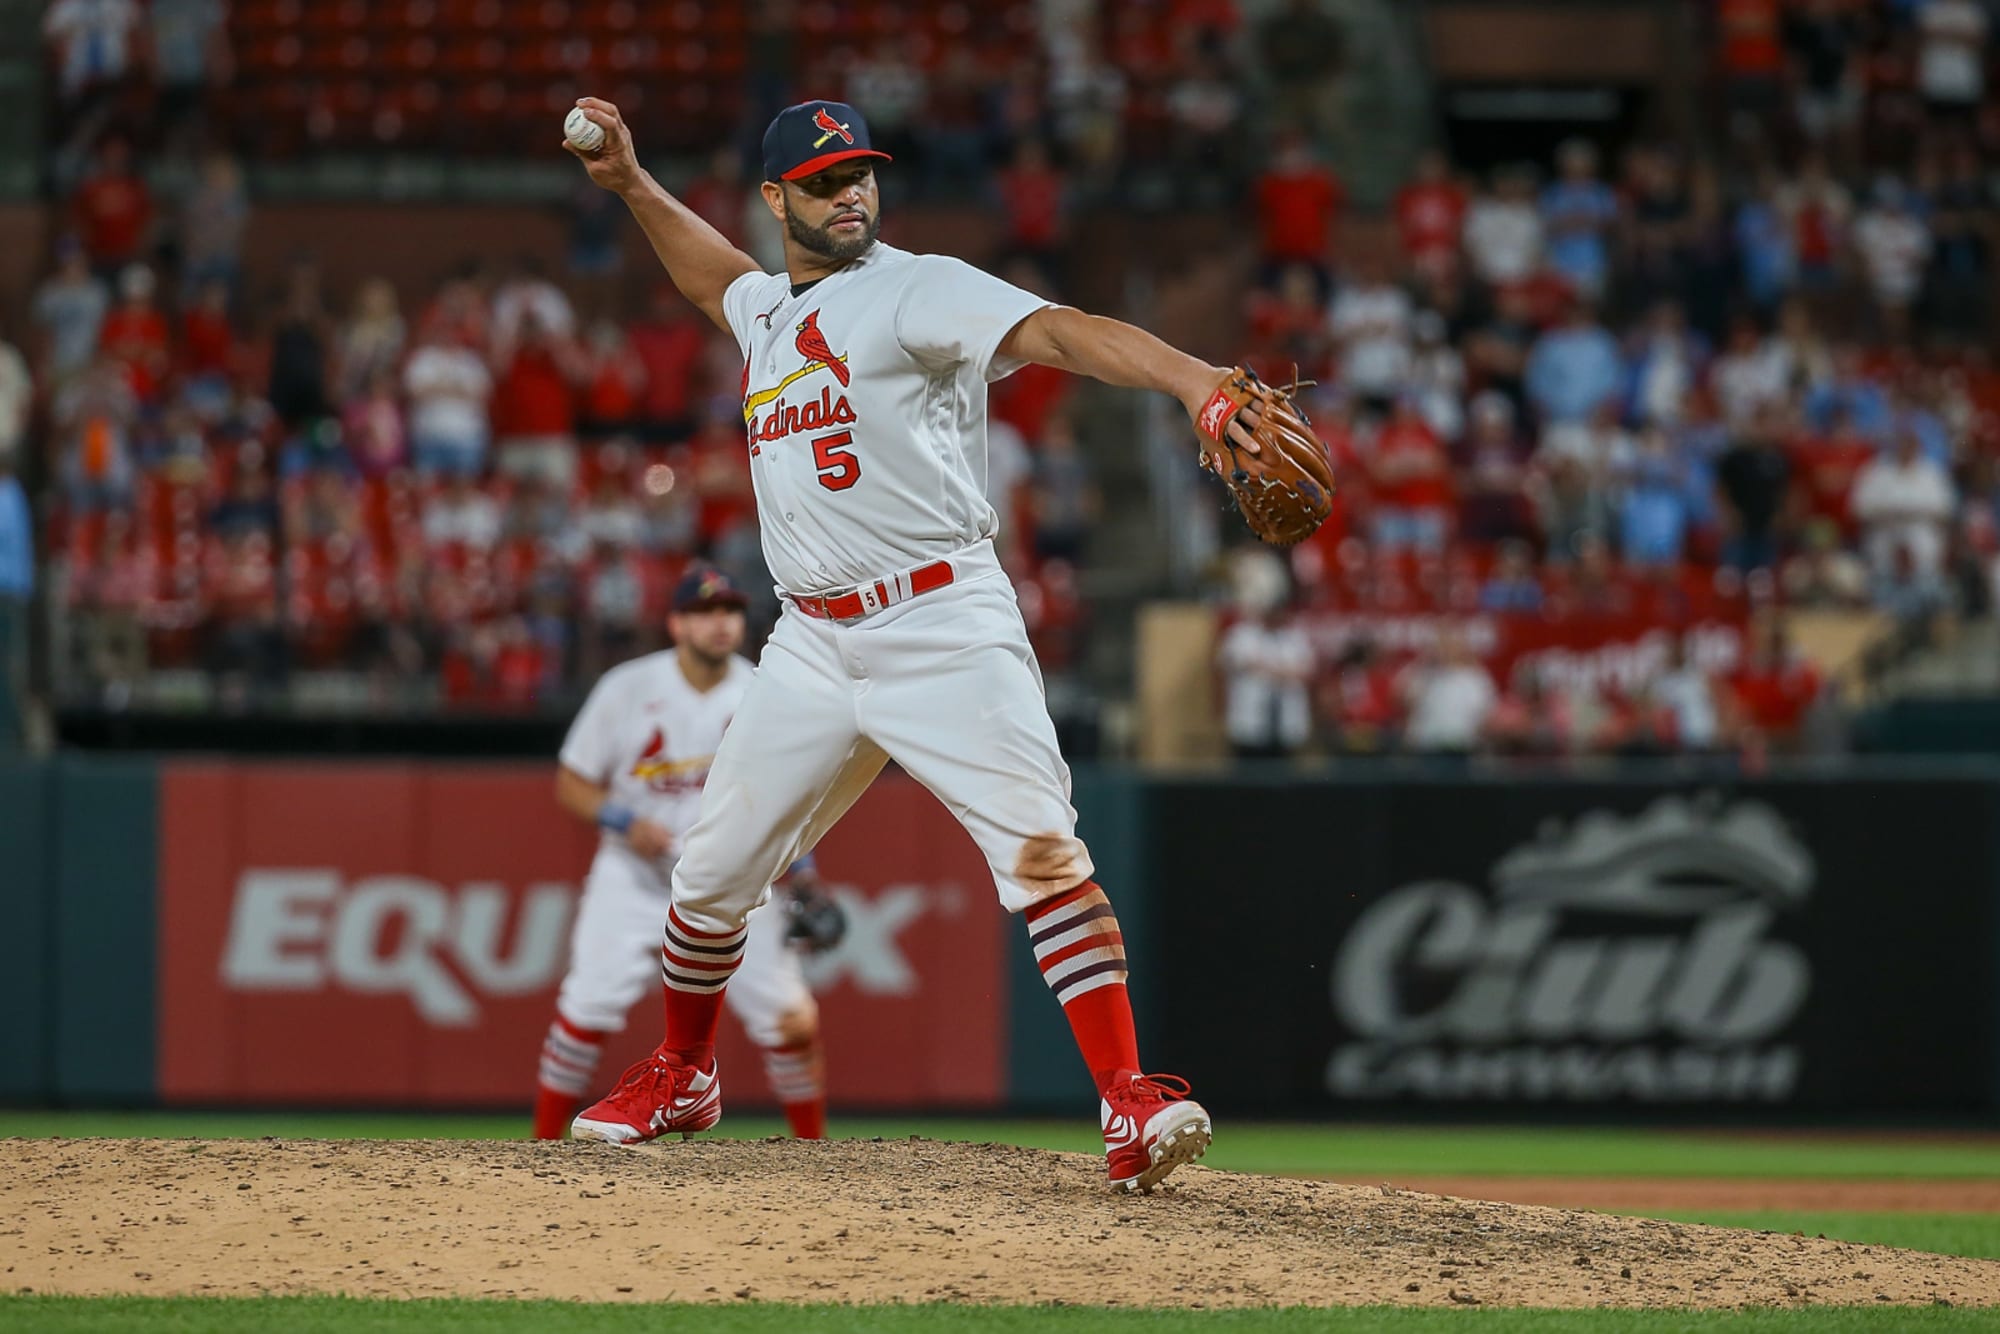 Albert Pujols got to pitch for first time in his career in blowout win